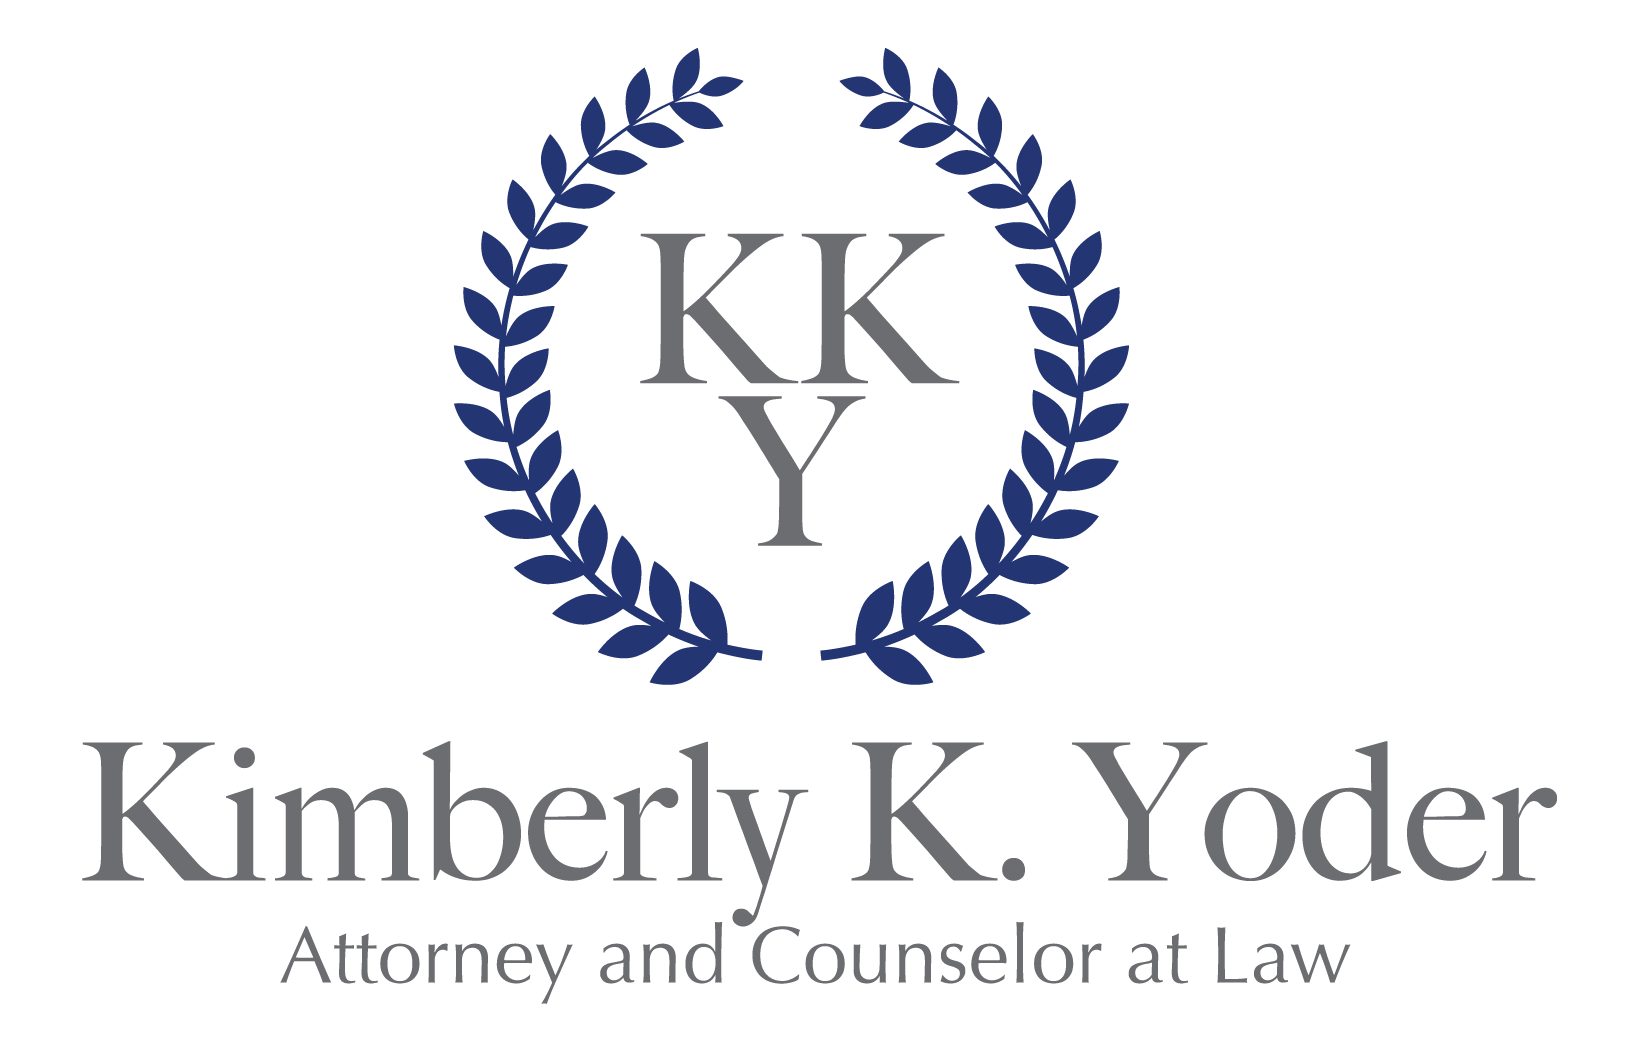 Cleveland Divorce Attorney, estate planning, business law, commercial, residential, will, trust, lawyer, lawyers, attorney, attorneys, Rocky River, Cleveland, Ohio, Lakewood, Westlake, North Olmstead, Avon, Elyria, Fairview Park, Lorain, Olmstead Falls, Middleburg Heights, Brookpark, Parma, Independence, Bay Village, Avon, North Ridgeville, Cuyahoga County, Lorain County, Medina County, OH, Northeast Ohio, Ronald Mills, Cleveland Divorce Attorney - Family Law, Ohio Divorce, Dissolution, Lauerbacher, Domestic Violence